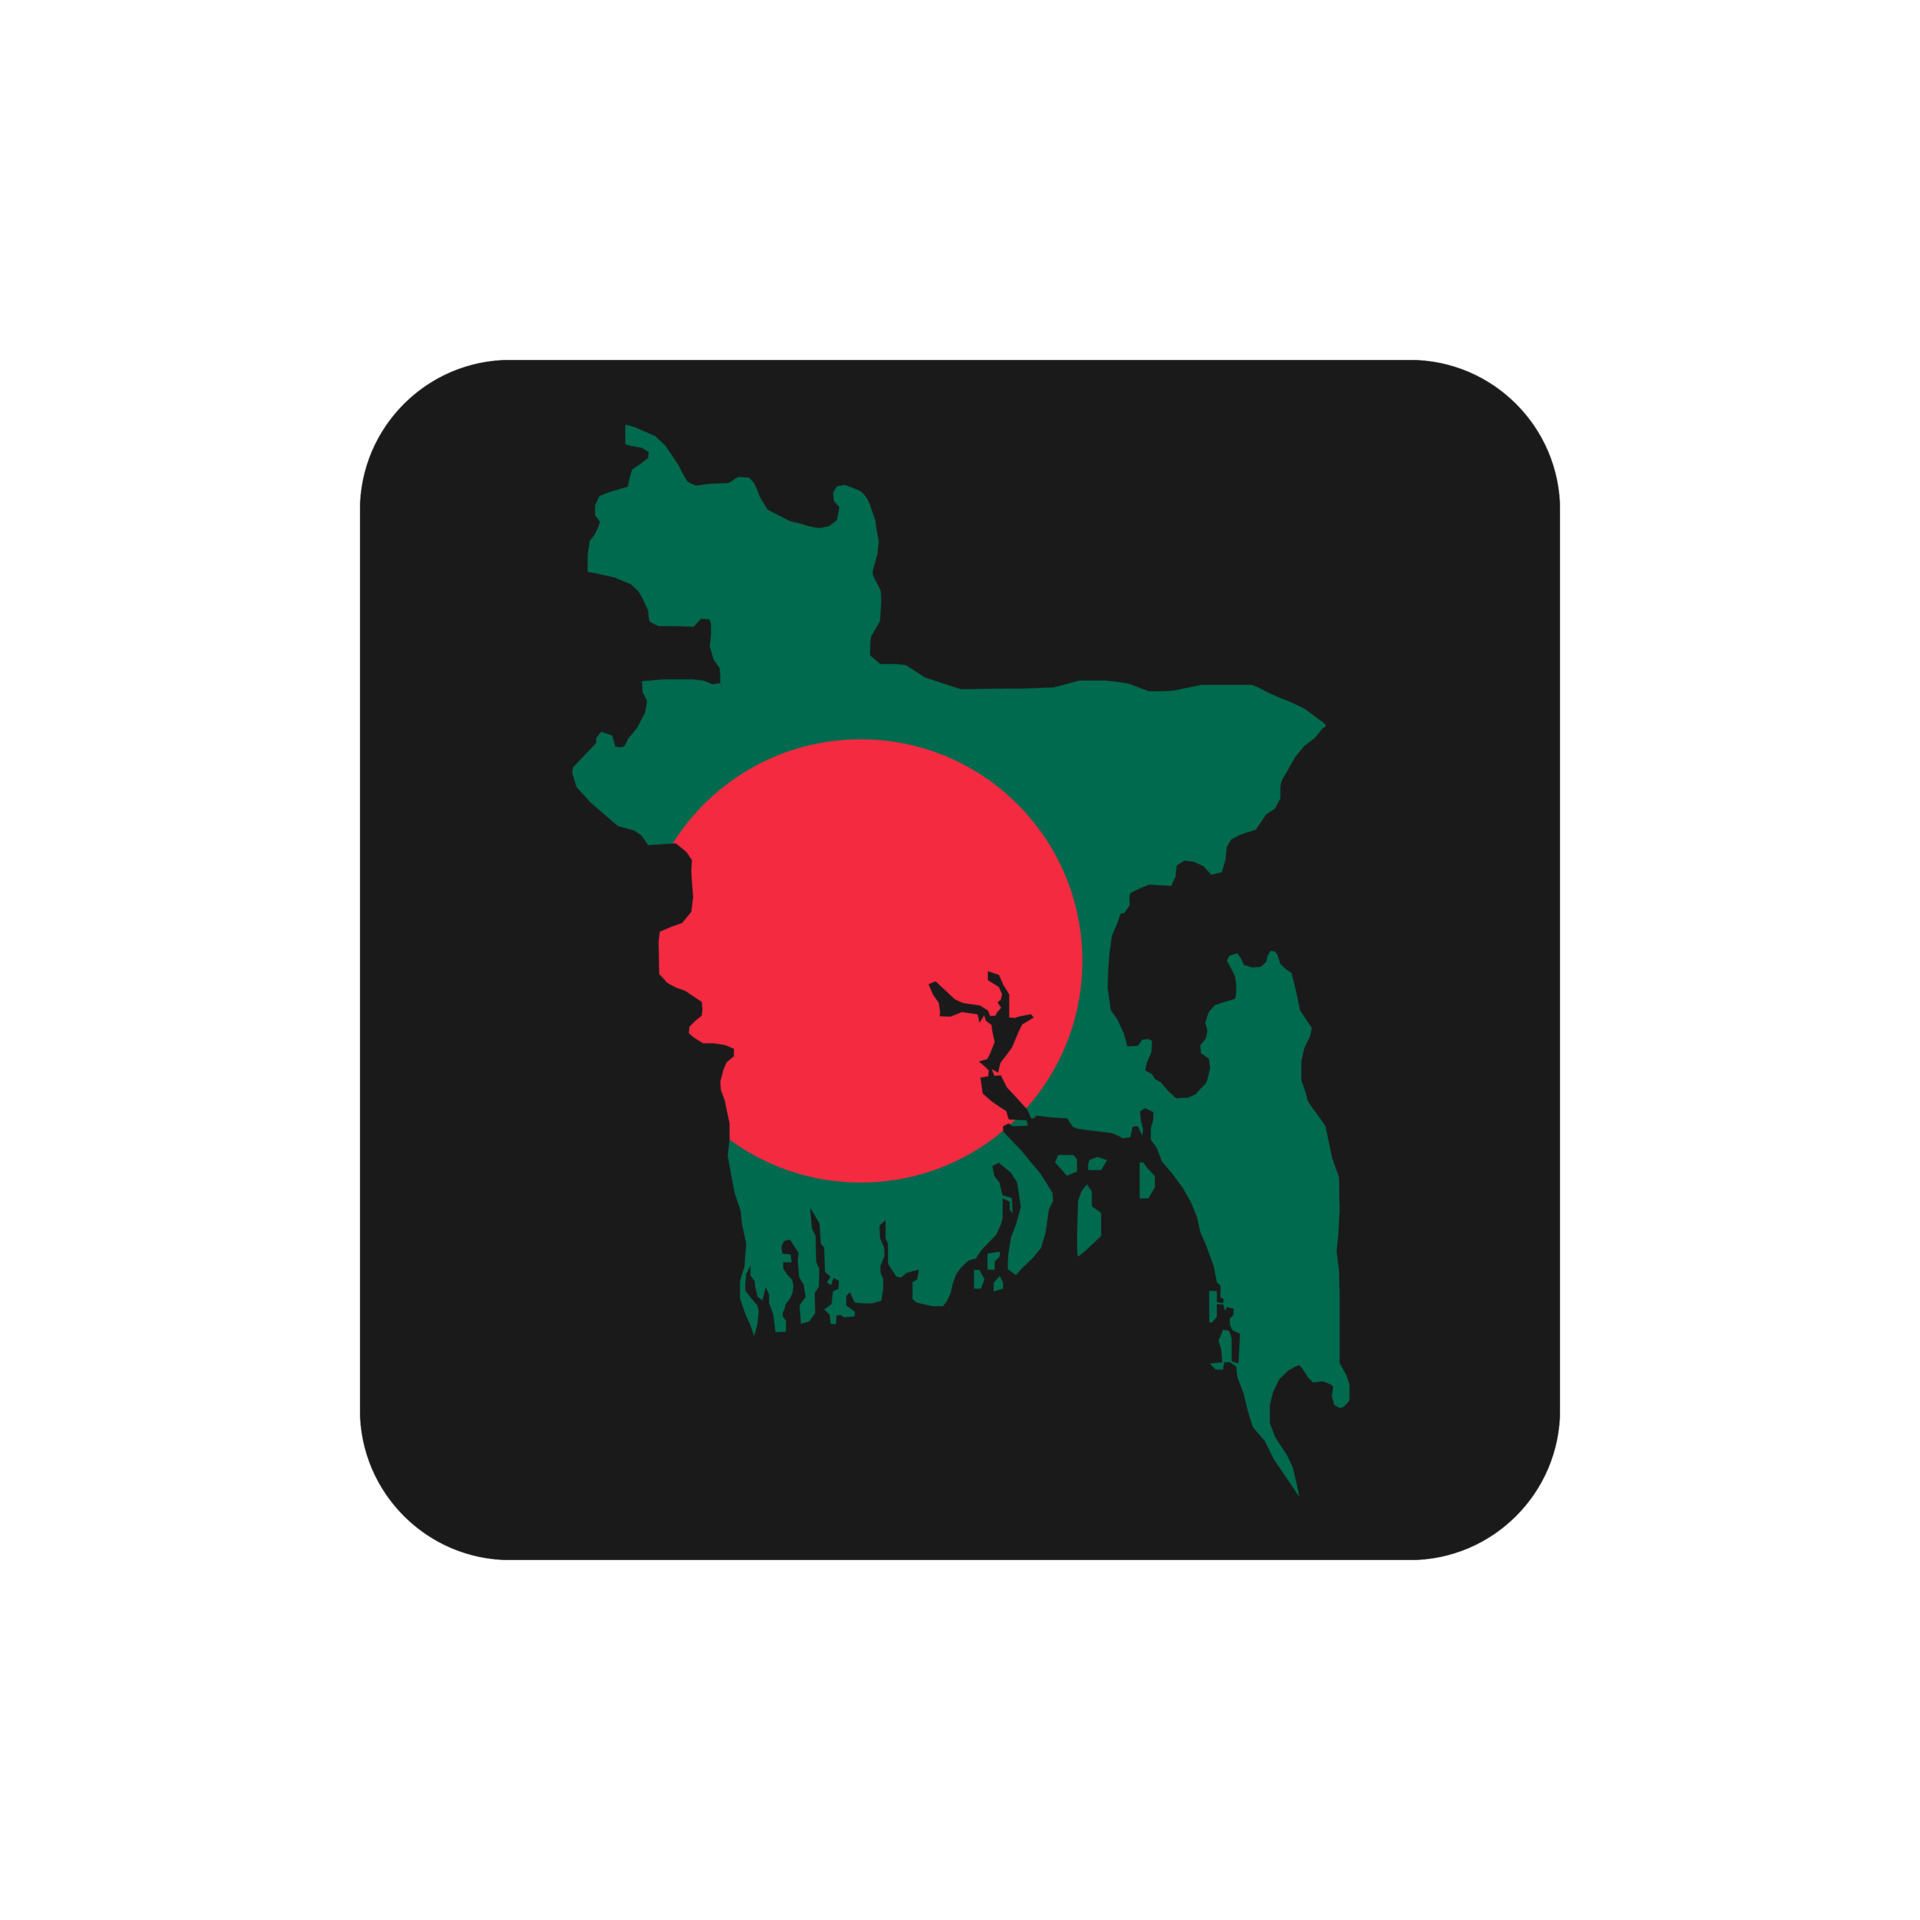 Bangladesh Map Vector Images (over 2,300)